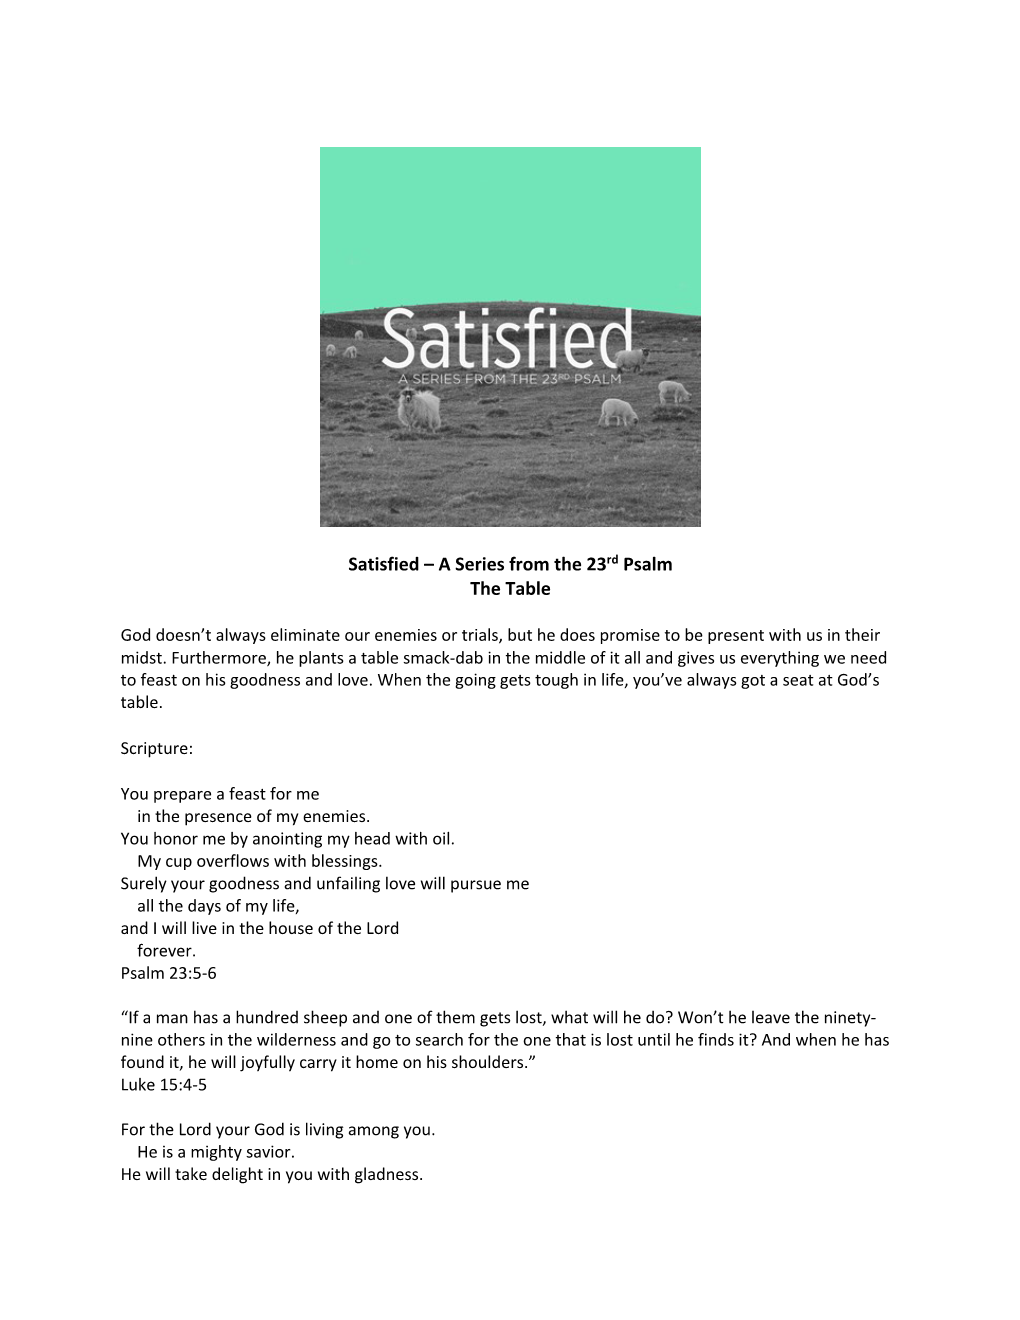 Satisfied – a Series from the 23Rd Psalm the Table